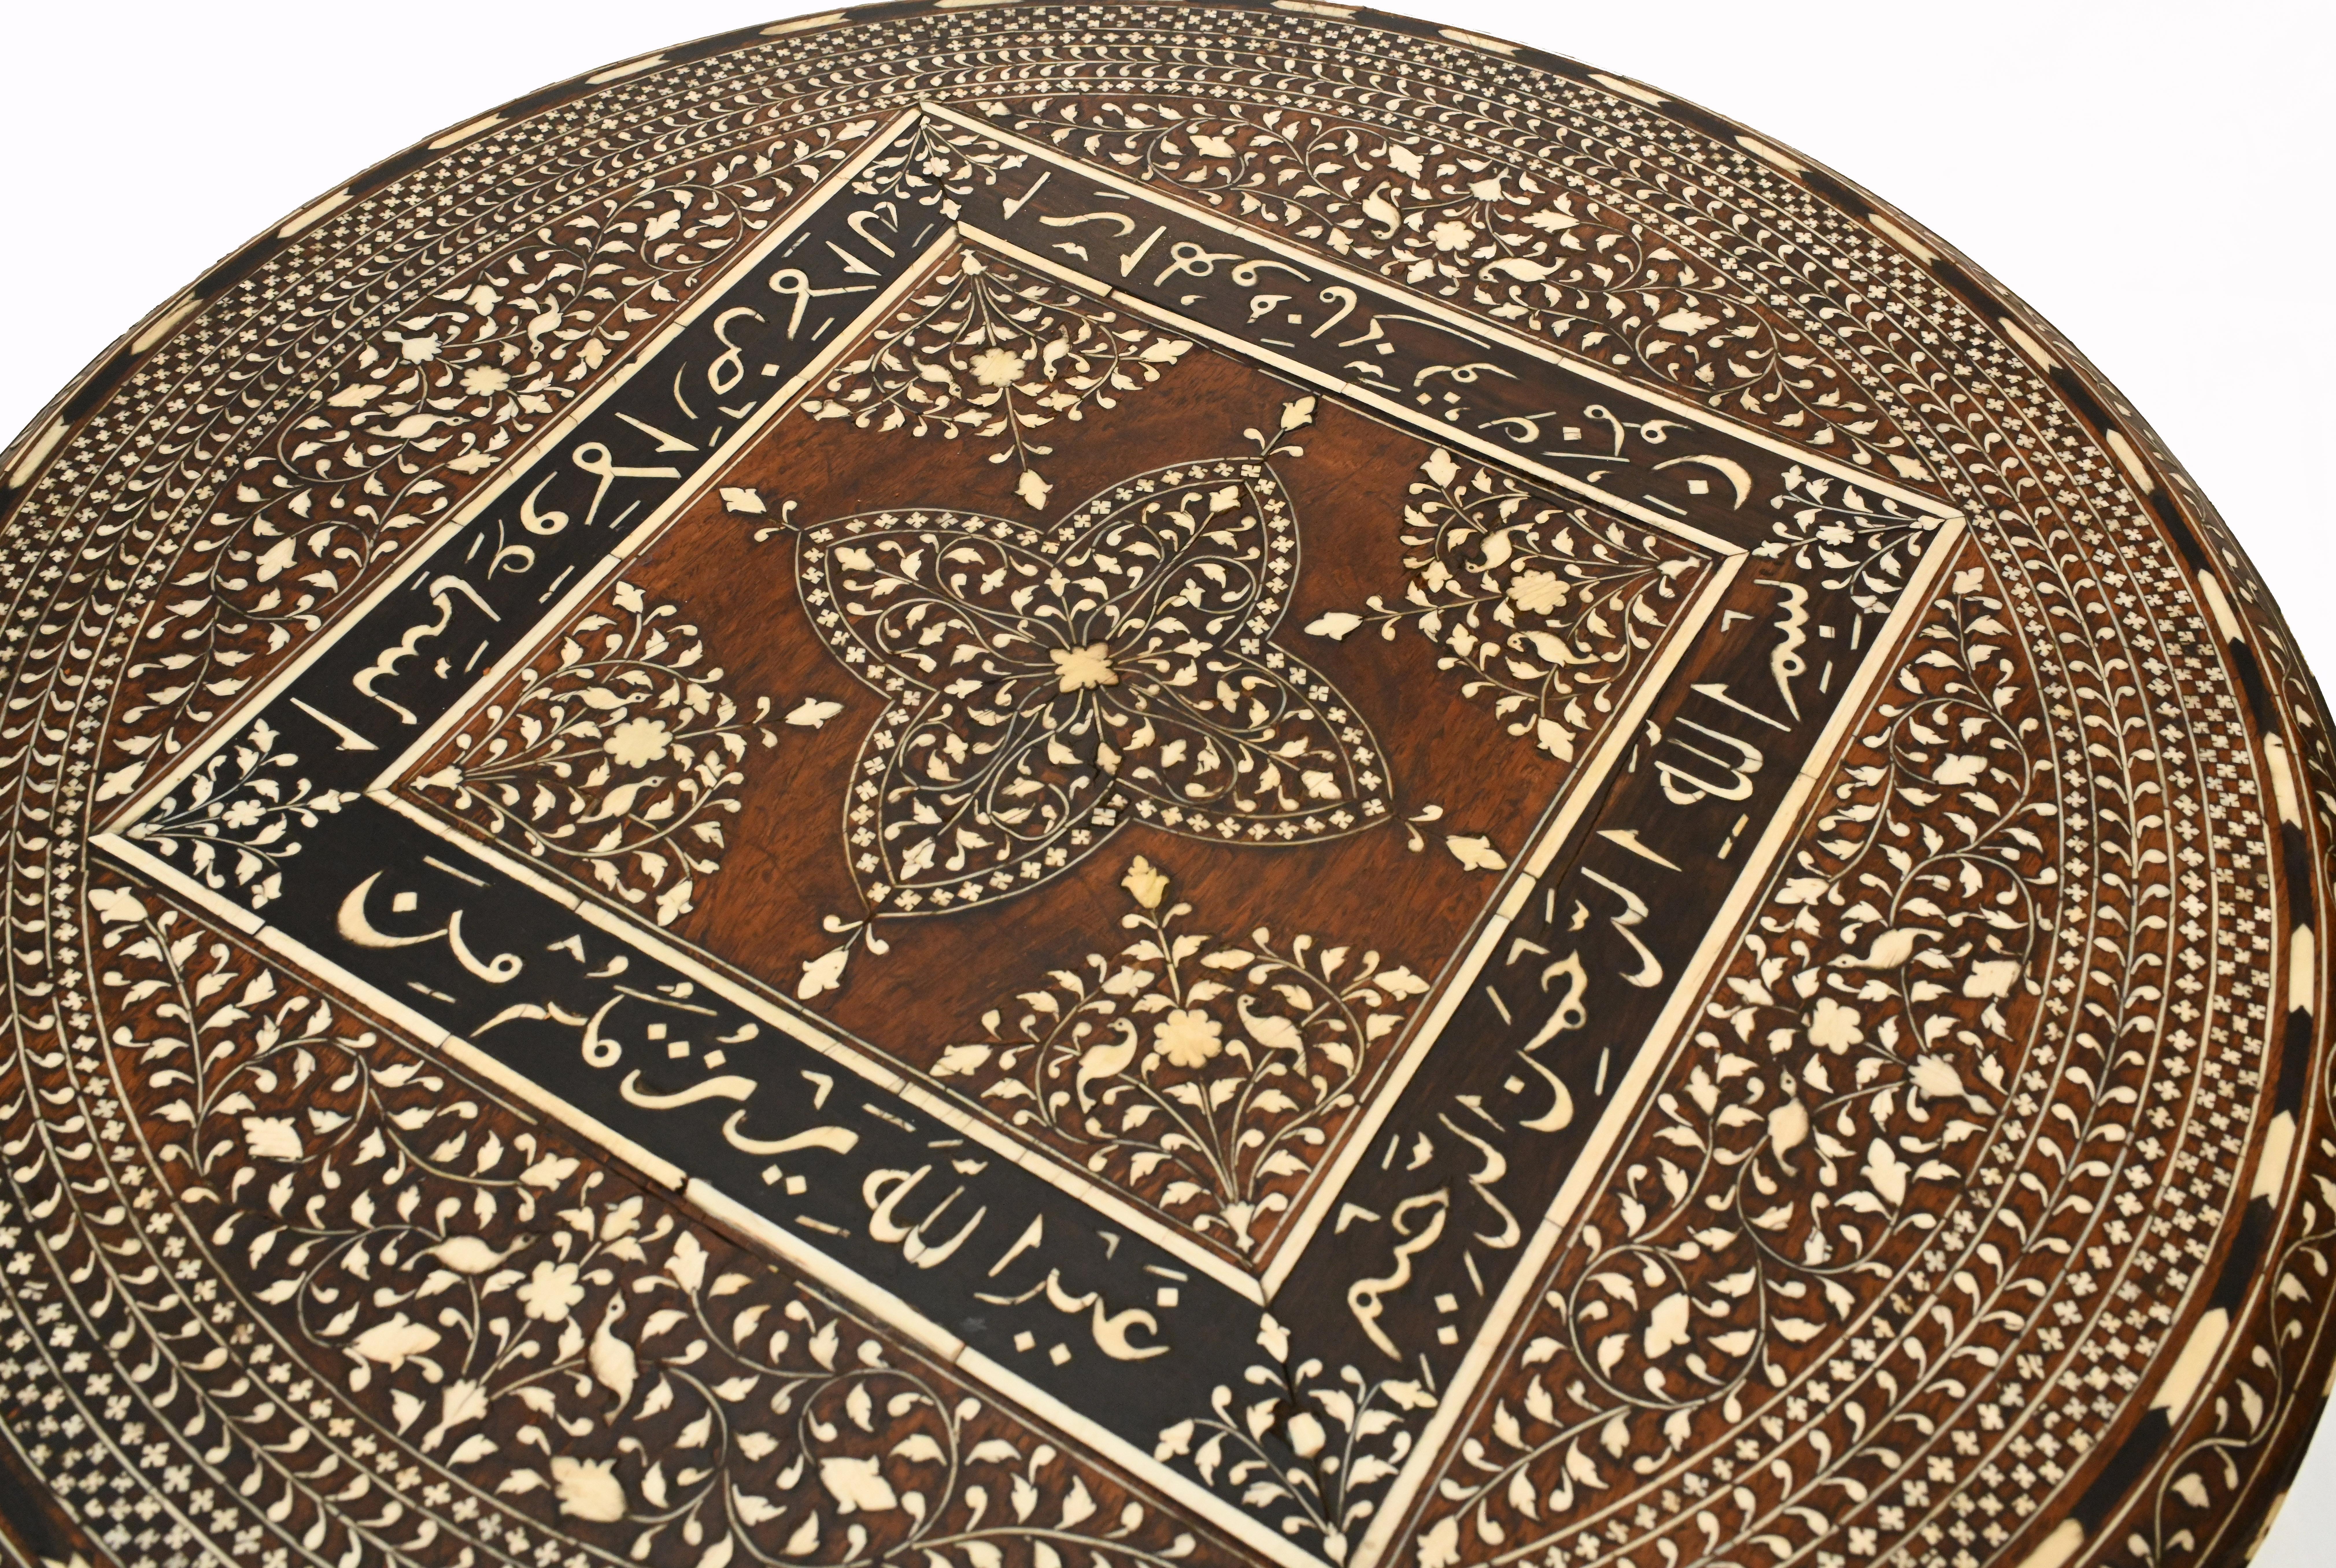 Absolutely stunning Islamic side table we date to circa 1870
The workmanship on this work of art is incredible
Look at the intricate and ornate foliate designs with complex geometric inlays and Arabic calligraphy
Great Moorish look which is very